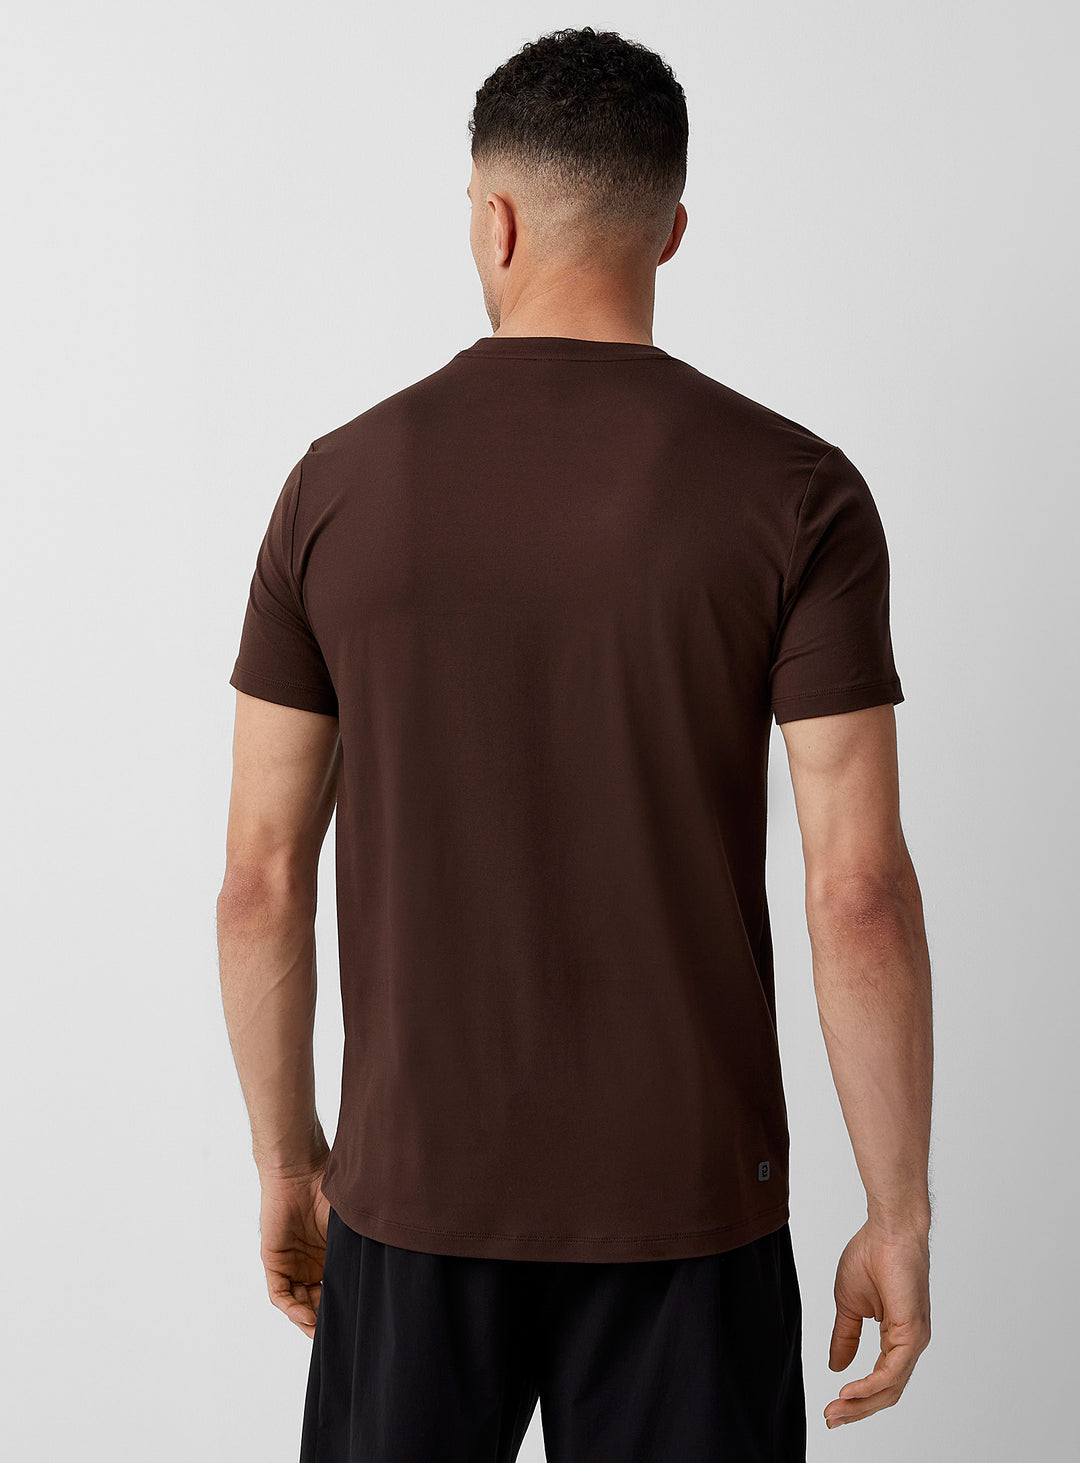 Tempest Brown - Half sleeves T- Shirt